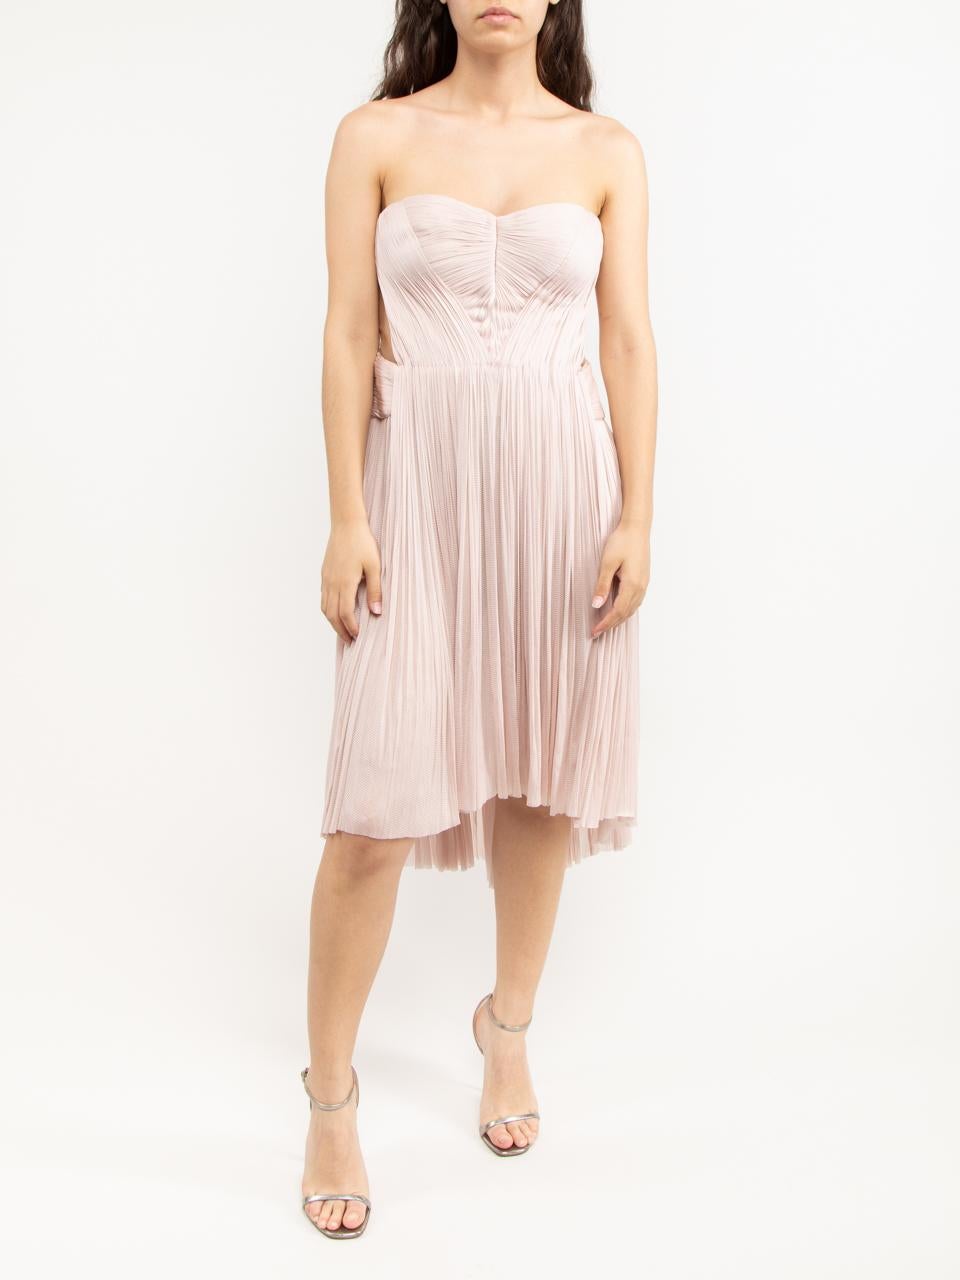 CONDITION is Very good. Minimal wear and pilling to dress is evident on this used Maria Lucia Hohan designer resale item. Details Pink Polyamide Pleated effect Asymmetric dress Strapless Hidden hook fastening Backless effect Made in Romania